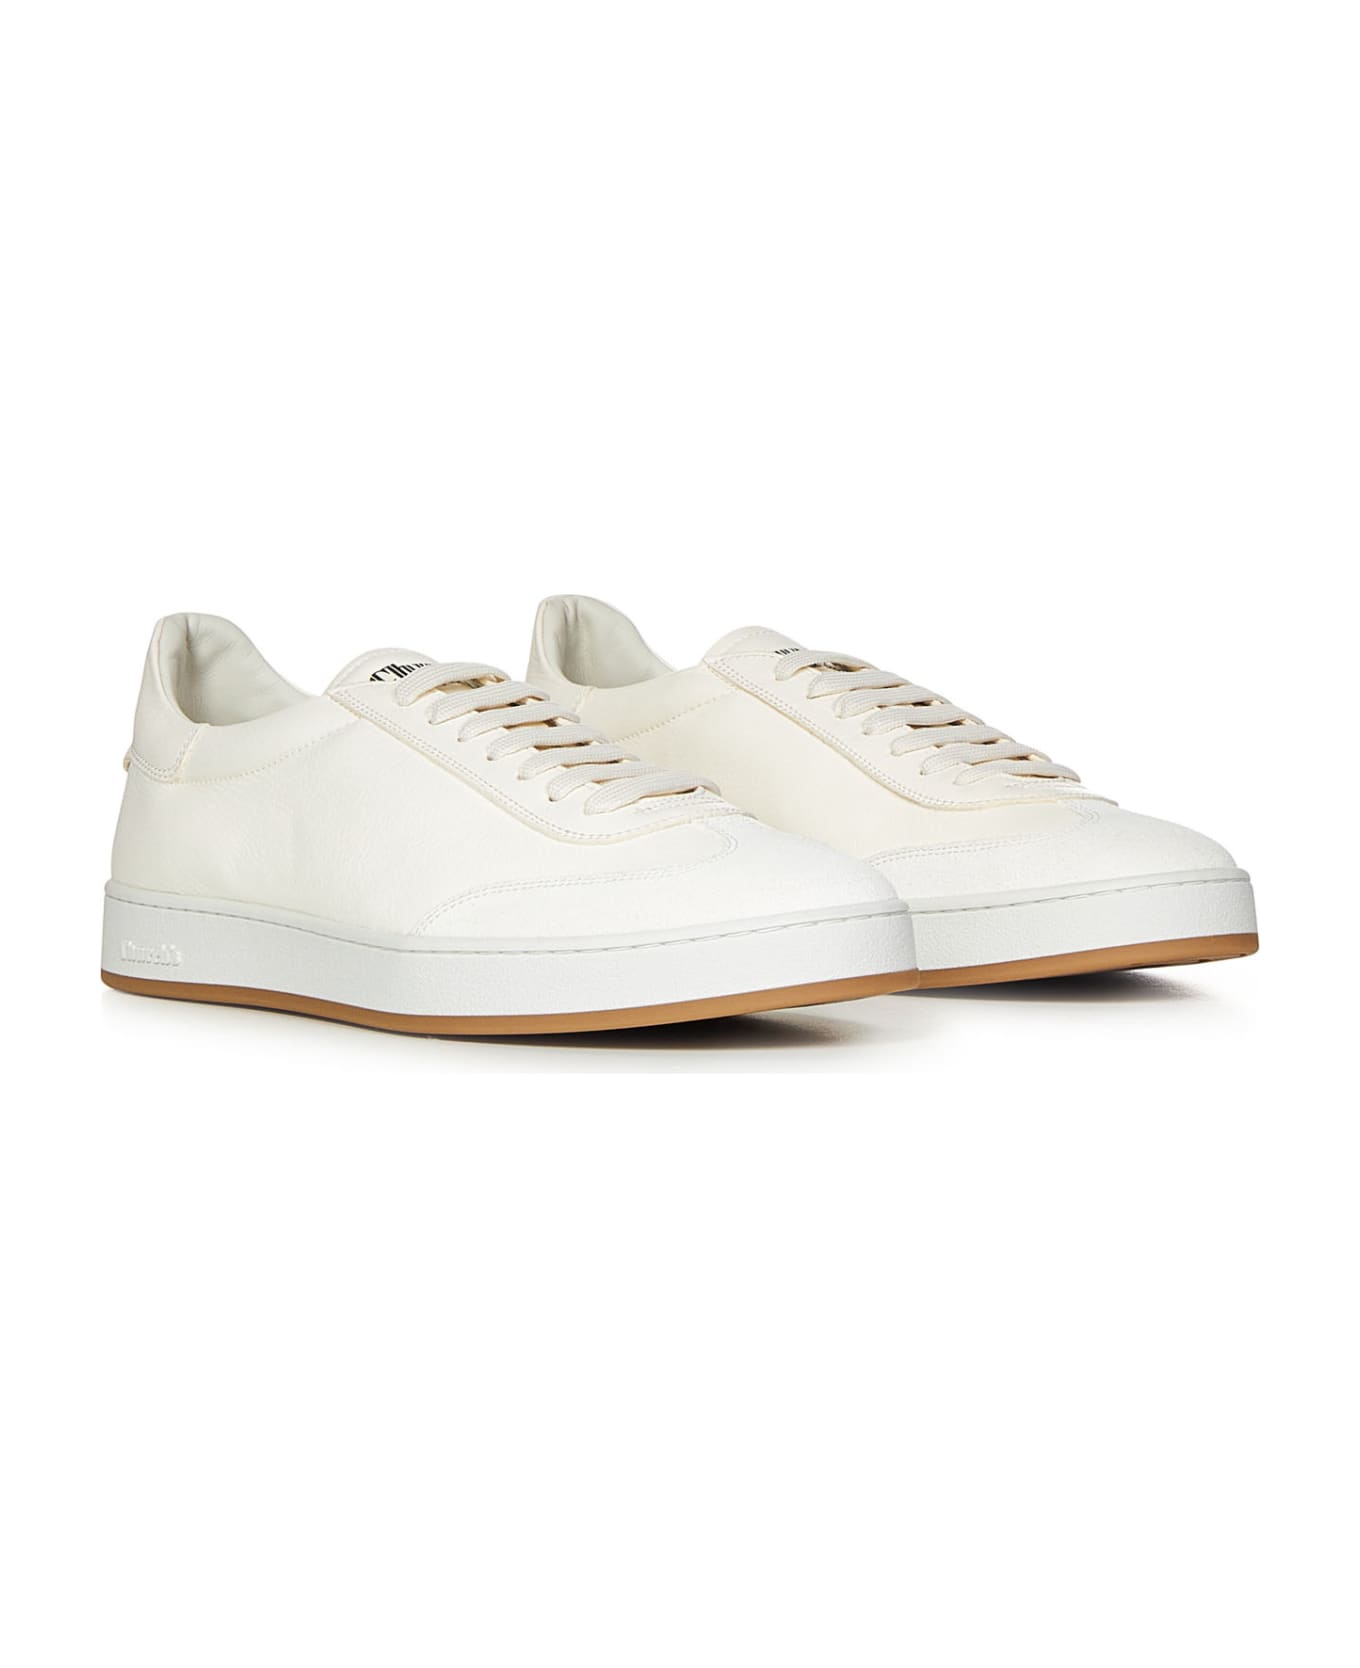 Church's Largs Sneakers - White スニーカー